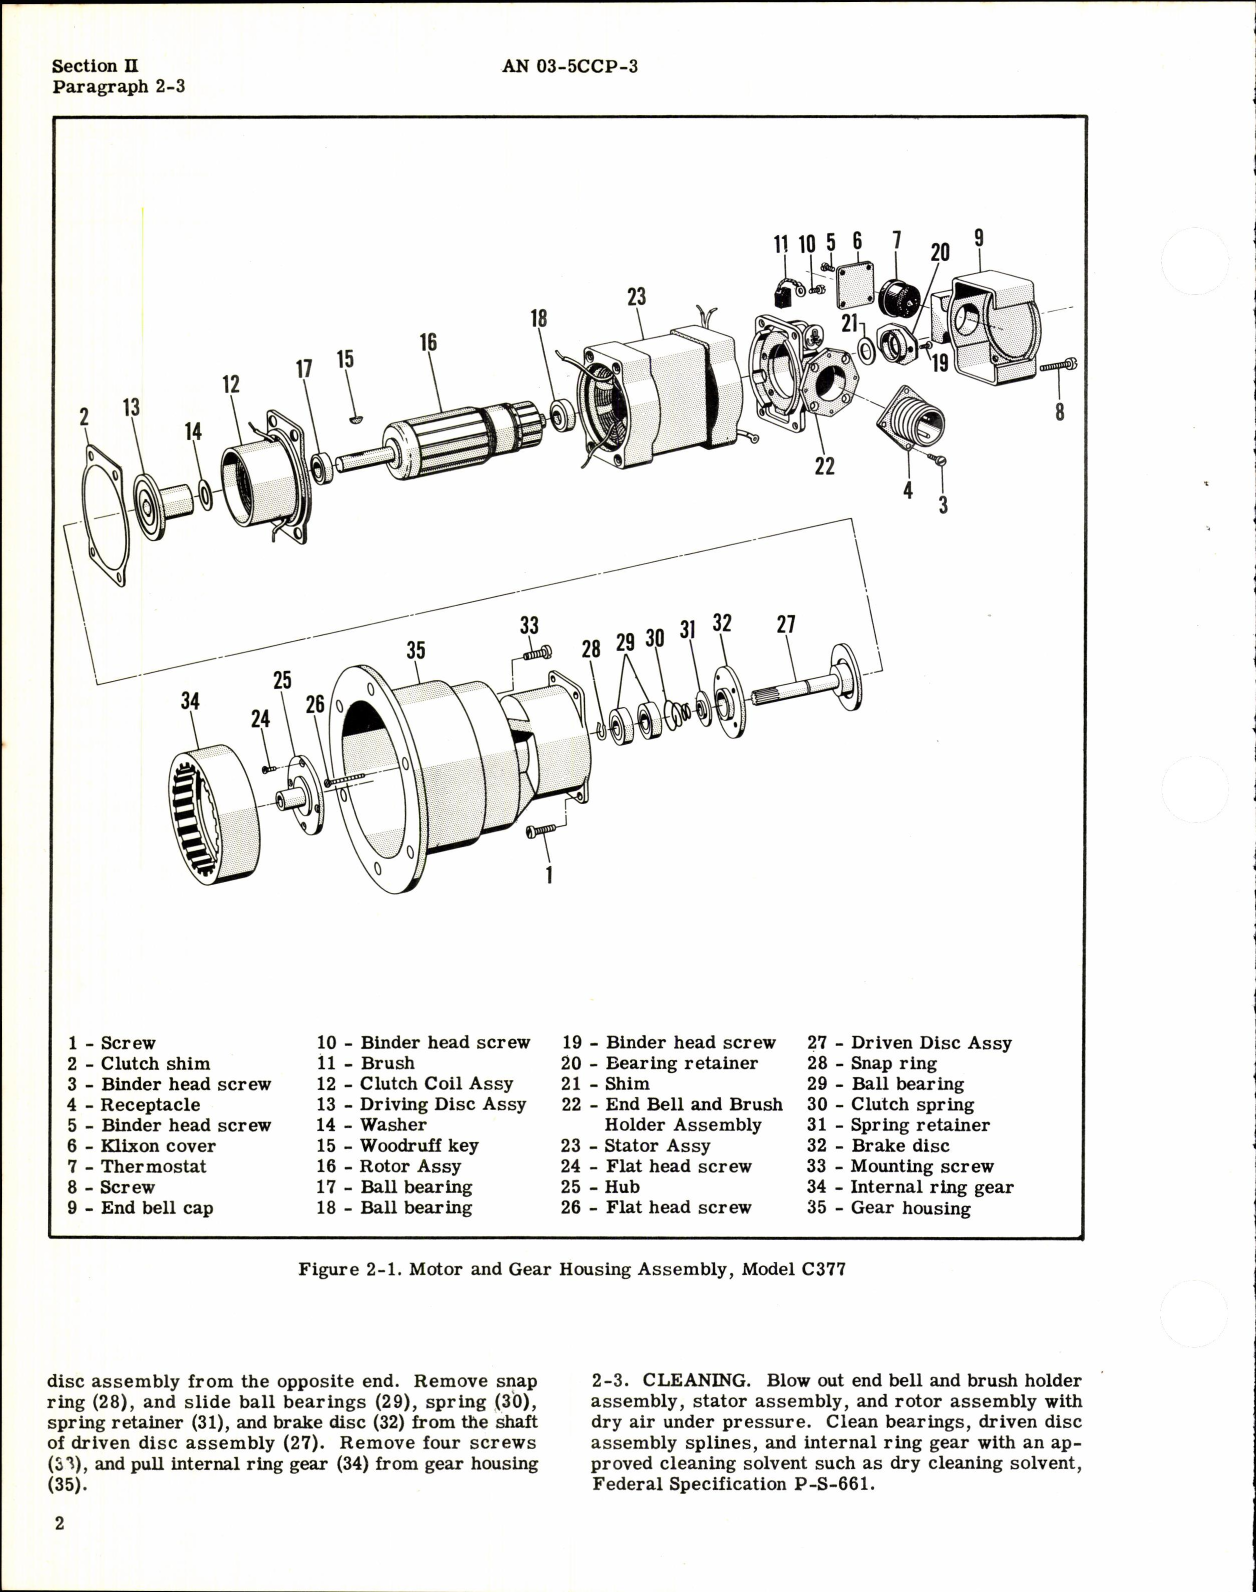 Sample page 4 from AirCorps Library document: Overhaul Instructions for Motor and Gear Housing Assembly Model C377